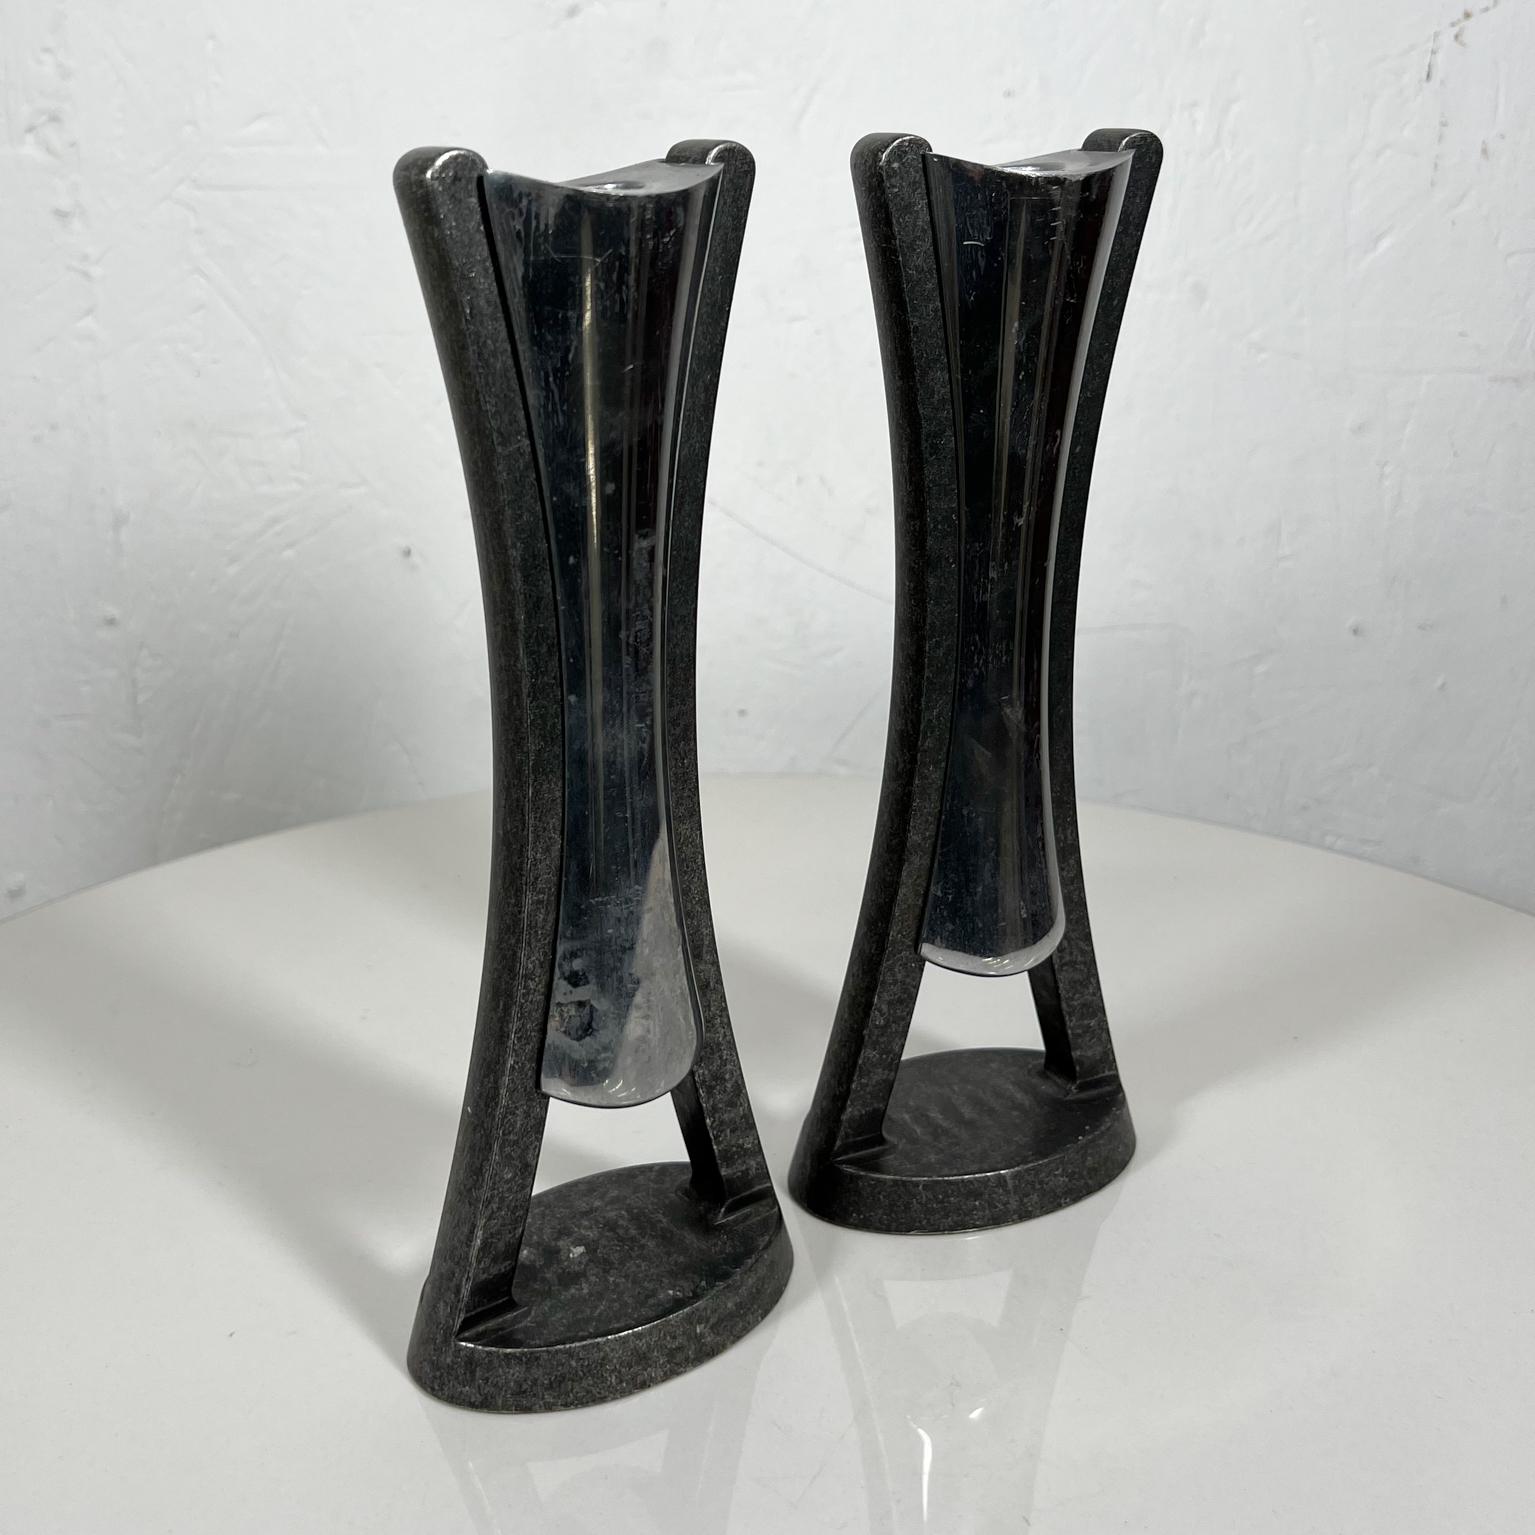 Aluminum 2010 Modern Vintage Nambe Sculptural Candle Holders by Neil Cohen